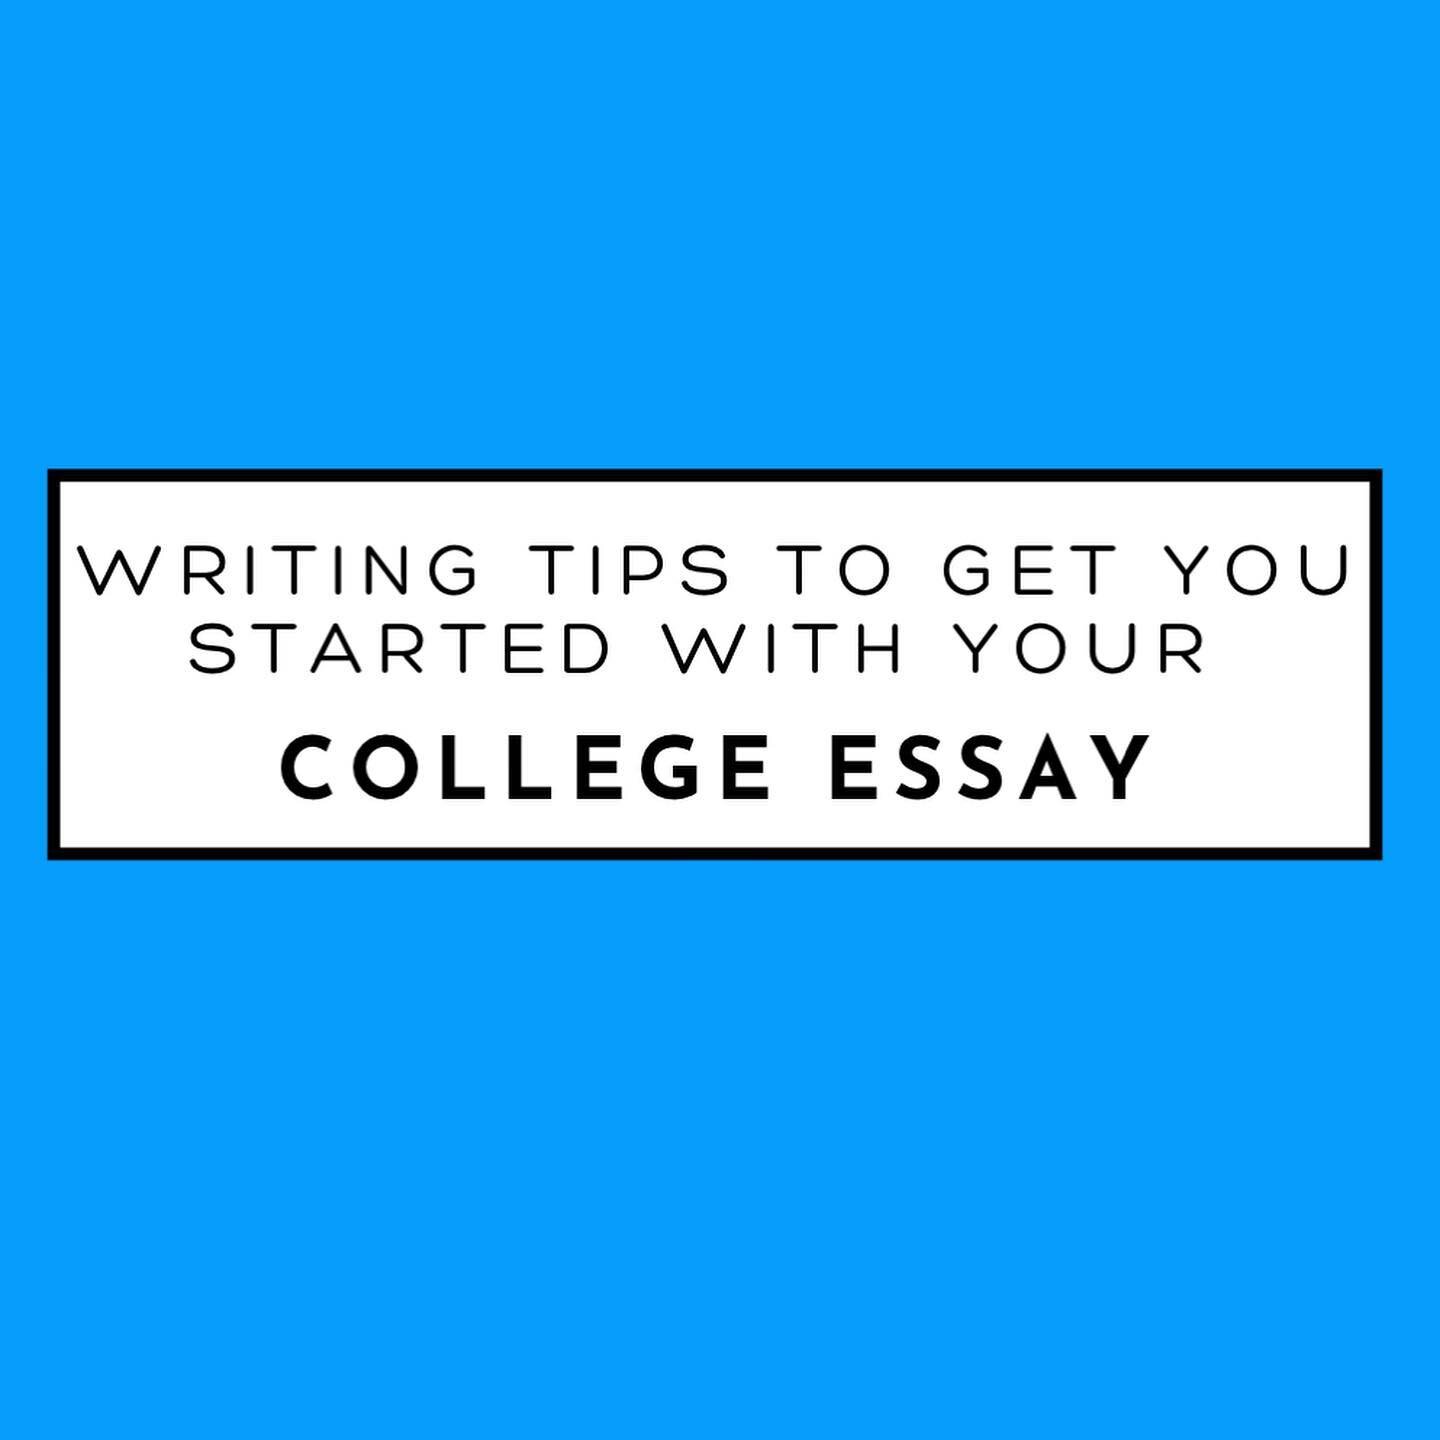 Some uncommon tips to get you started with the application process !!!!! 

.

.

#collegeadmissions #collegeessays #collegeessentials #uncommonadvisors #universityofmichigan #risd #brownuniversity #upenn #studyinusa #educationconsultant #educationcon